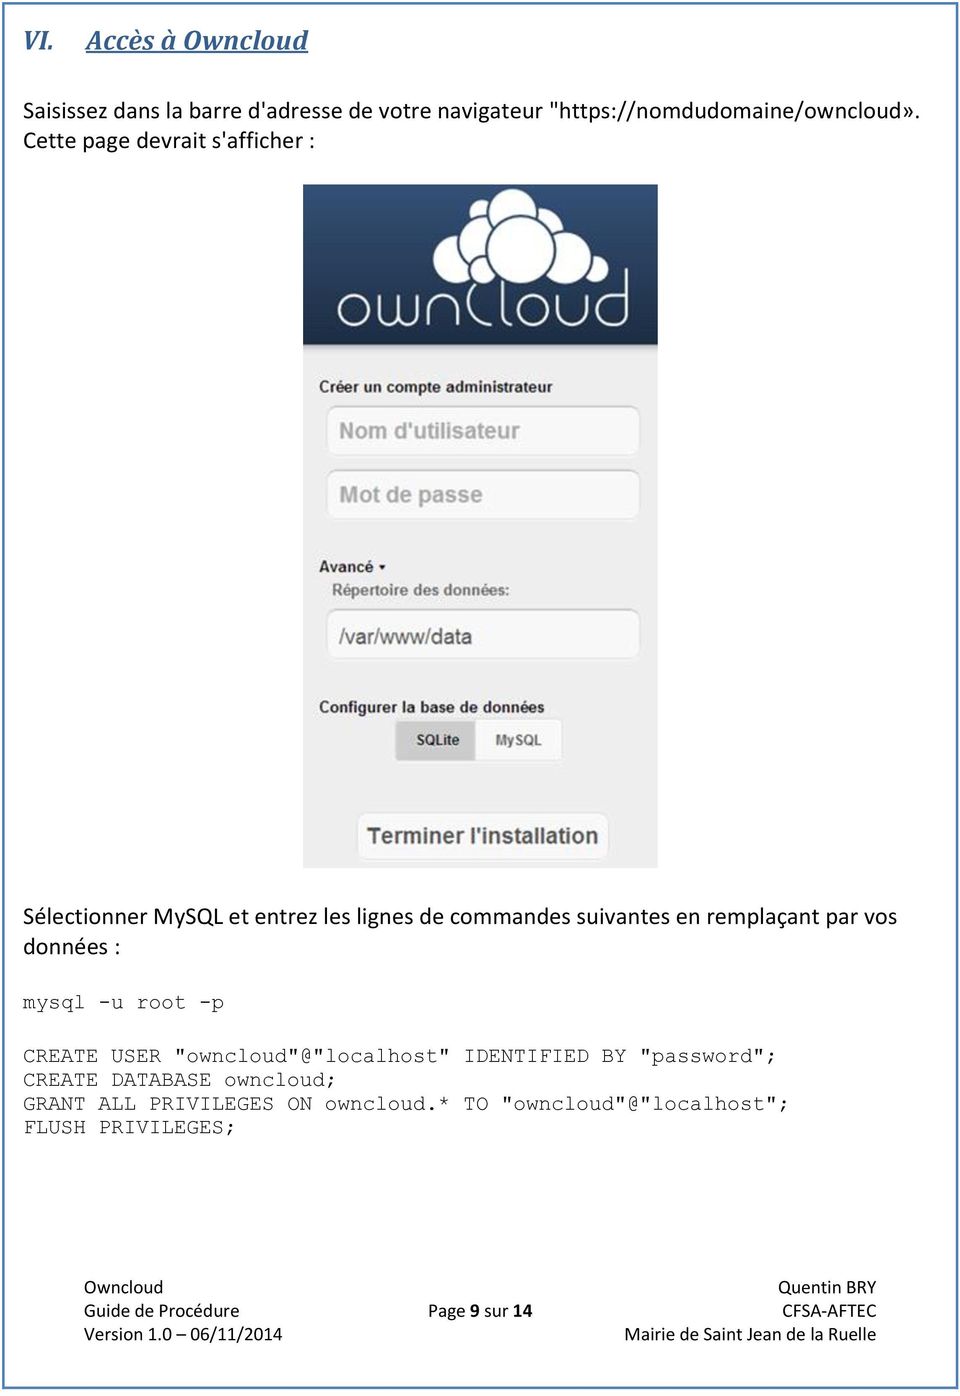 vos données : mysql -u root -p CREATE USER "owncloud"@"localhost" IDENTIFIED BY "password"; CREATE DATABASE